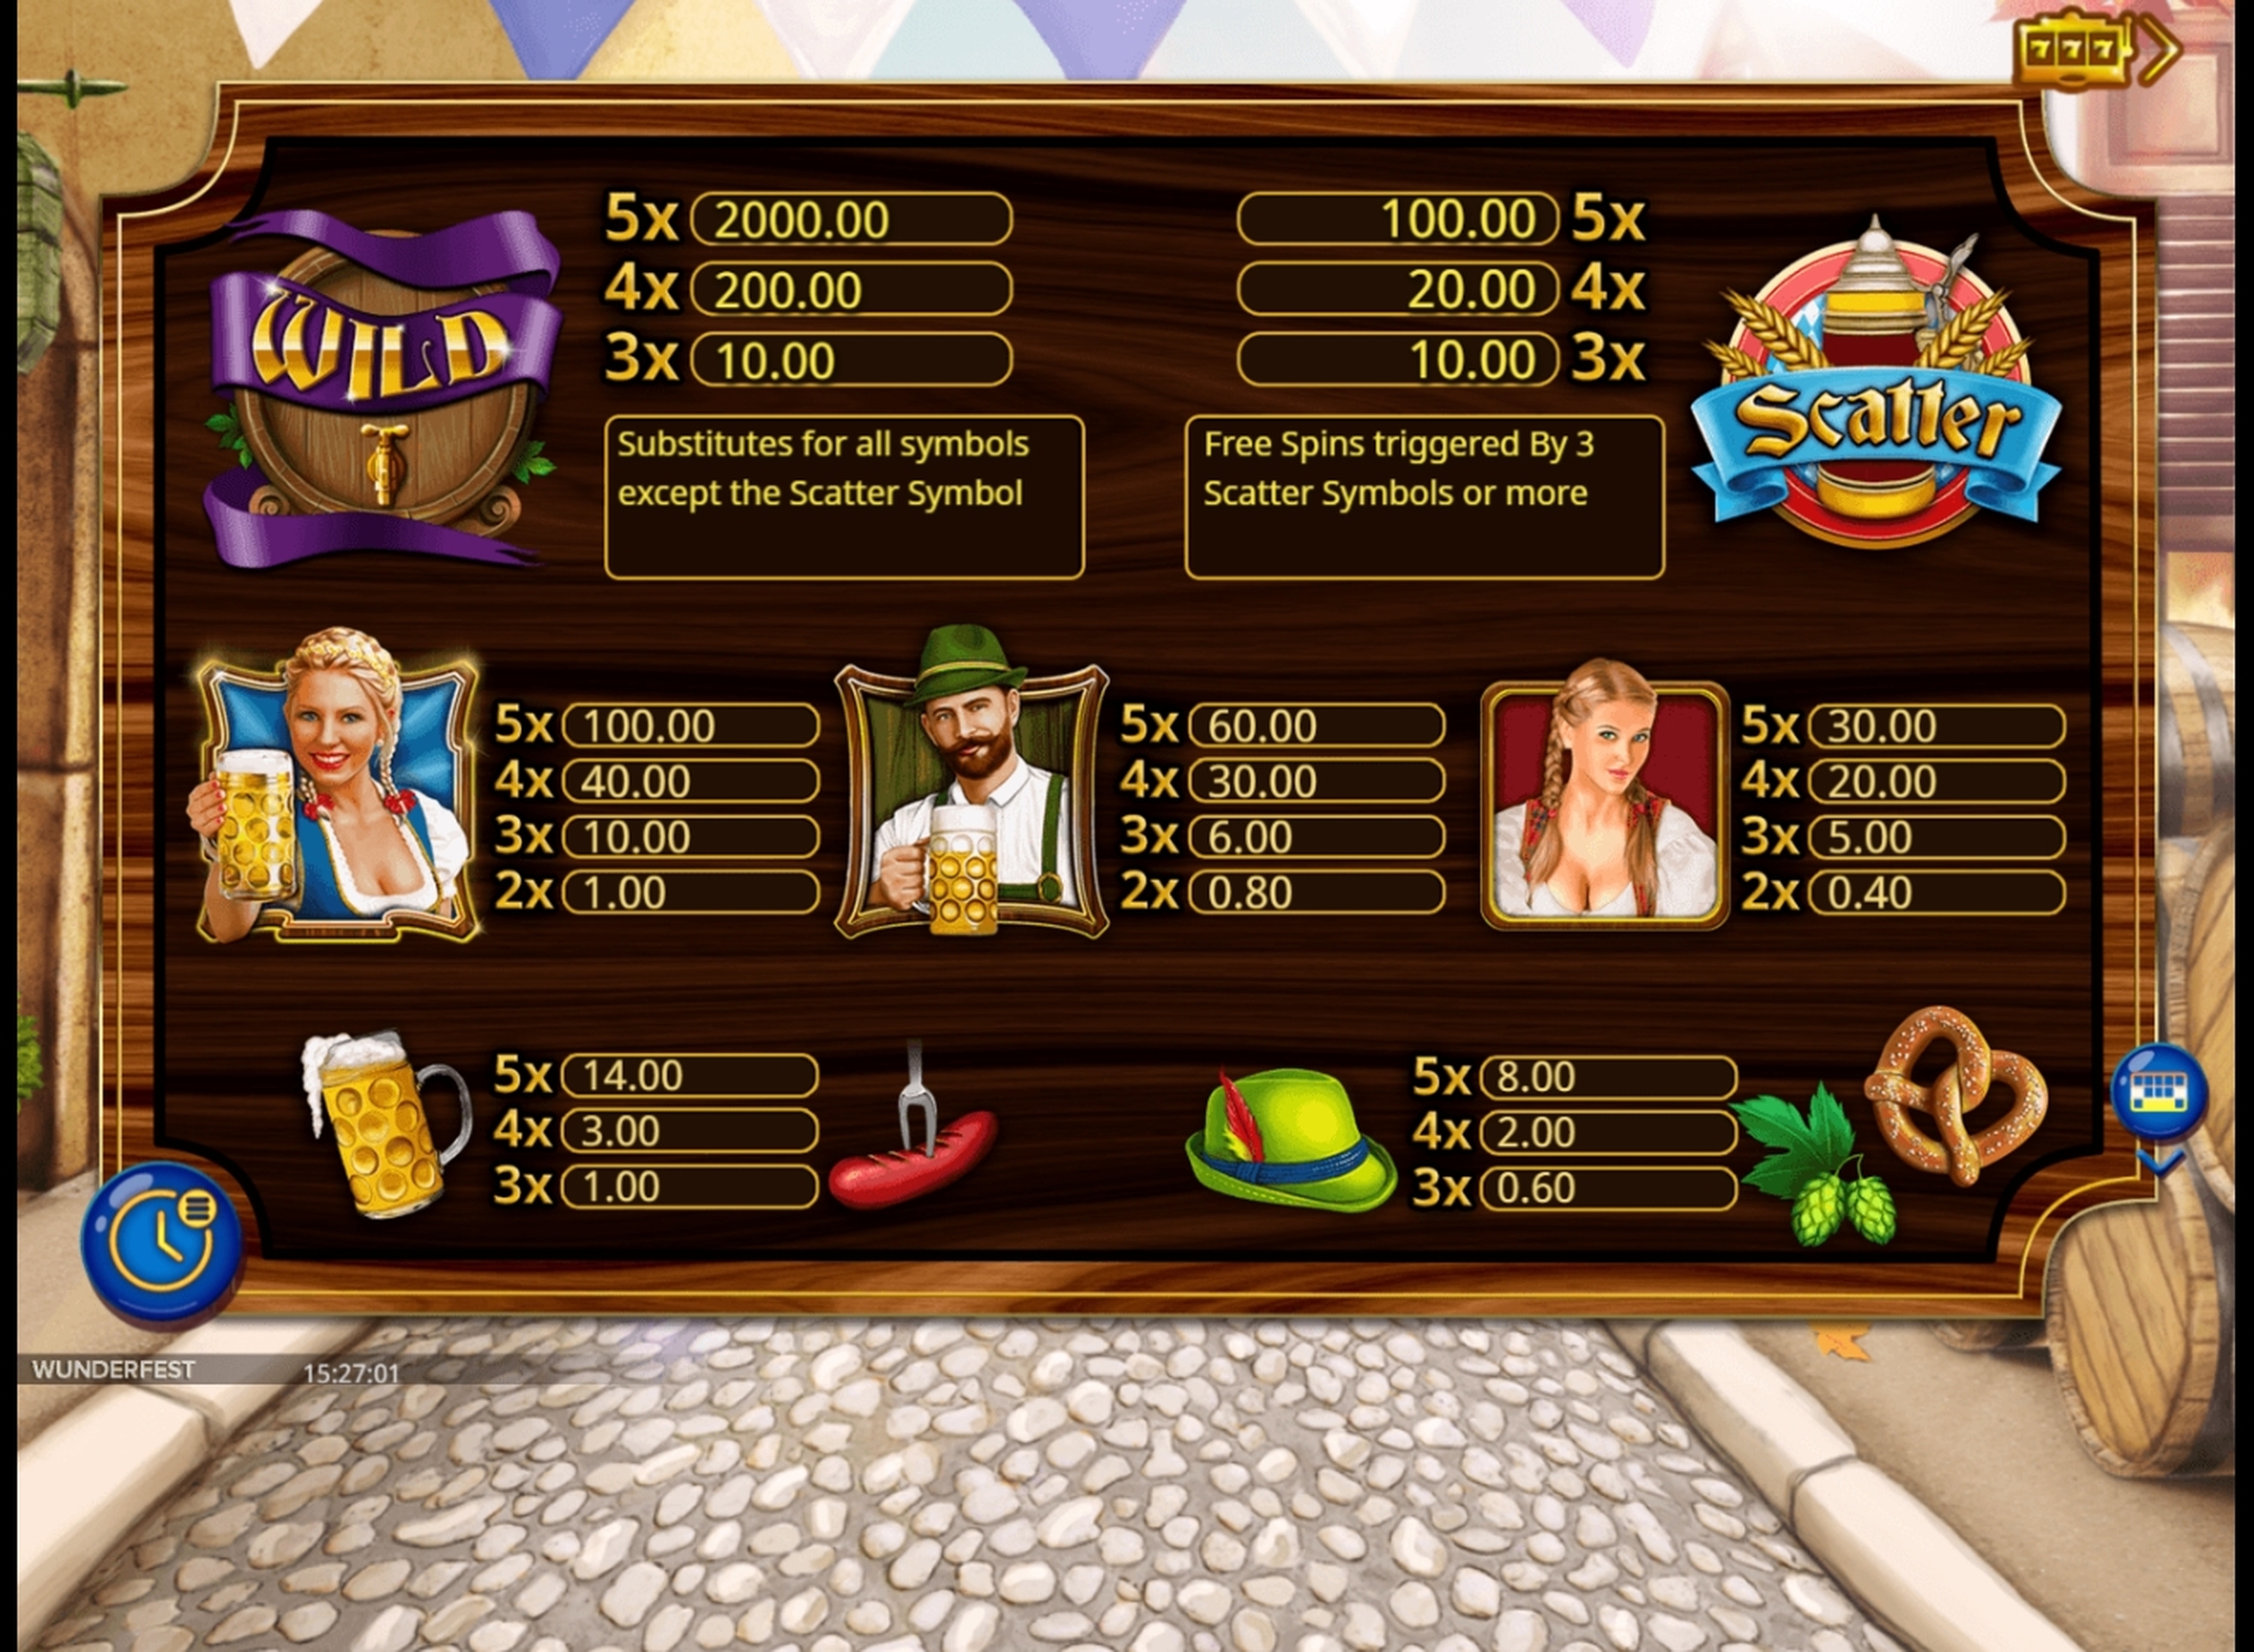 Info of Wunderfest Slot Game by Booming Games